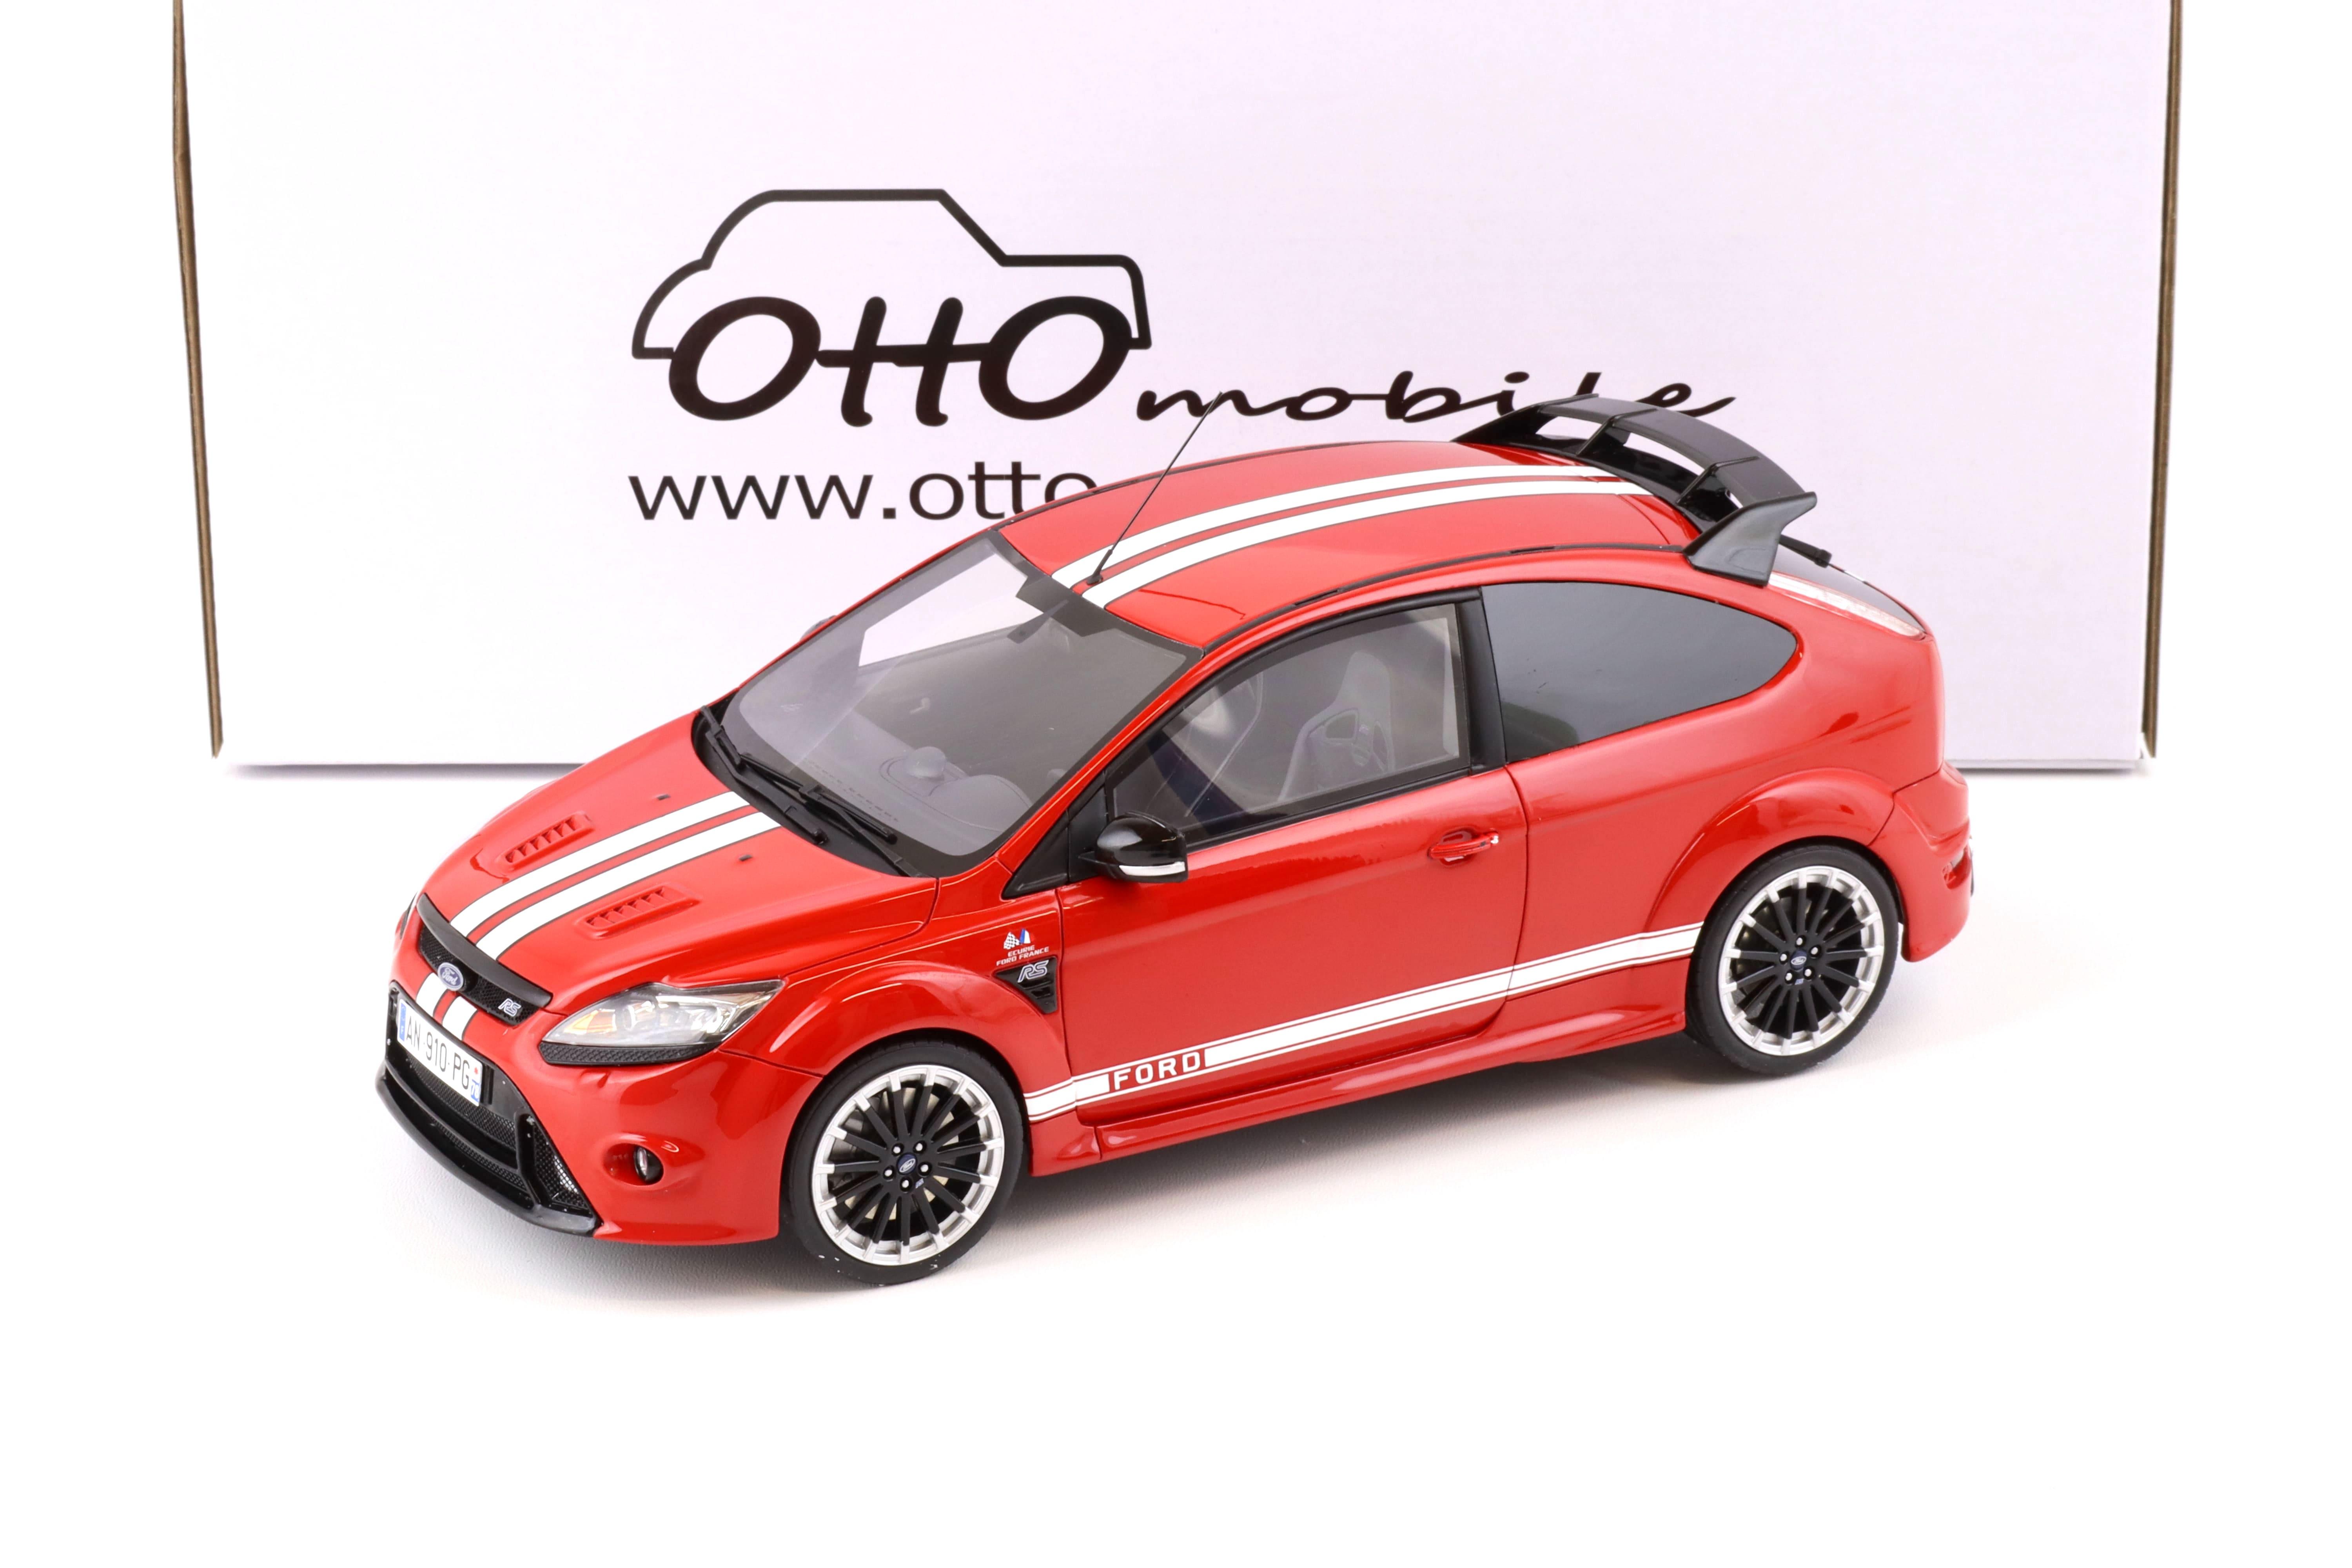 1:18 OTTO mobile OT1007 Ford Focus RS MK2 Le Mans red 2010